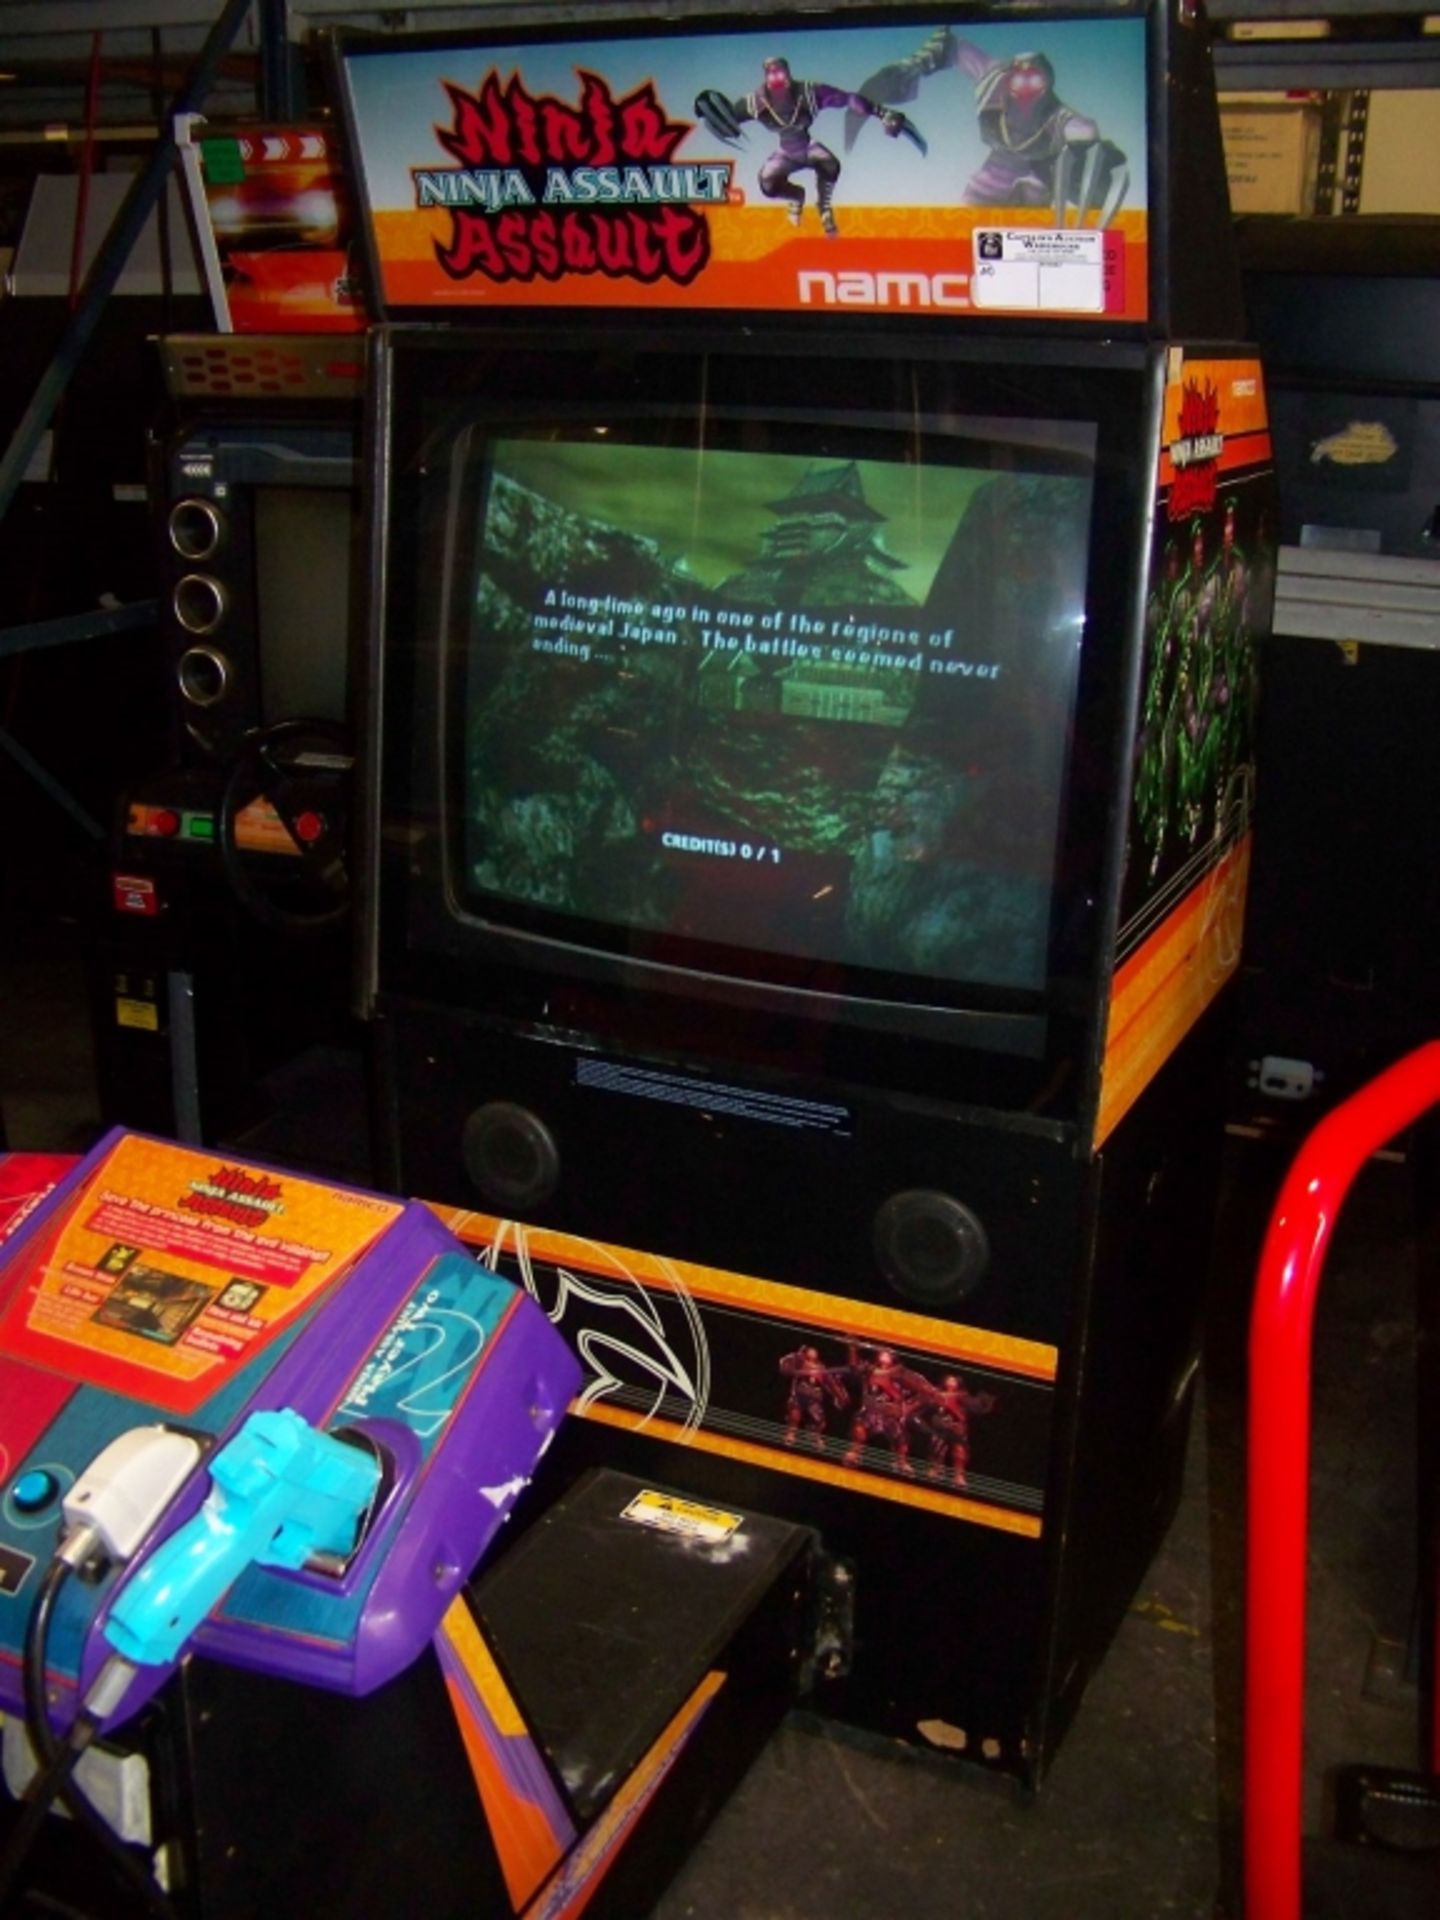 NINJA  ASSAULT DELUXE SHOOTER ARCADE GAME NAMCO - Image 5 of 6